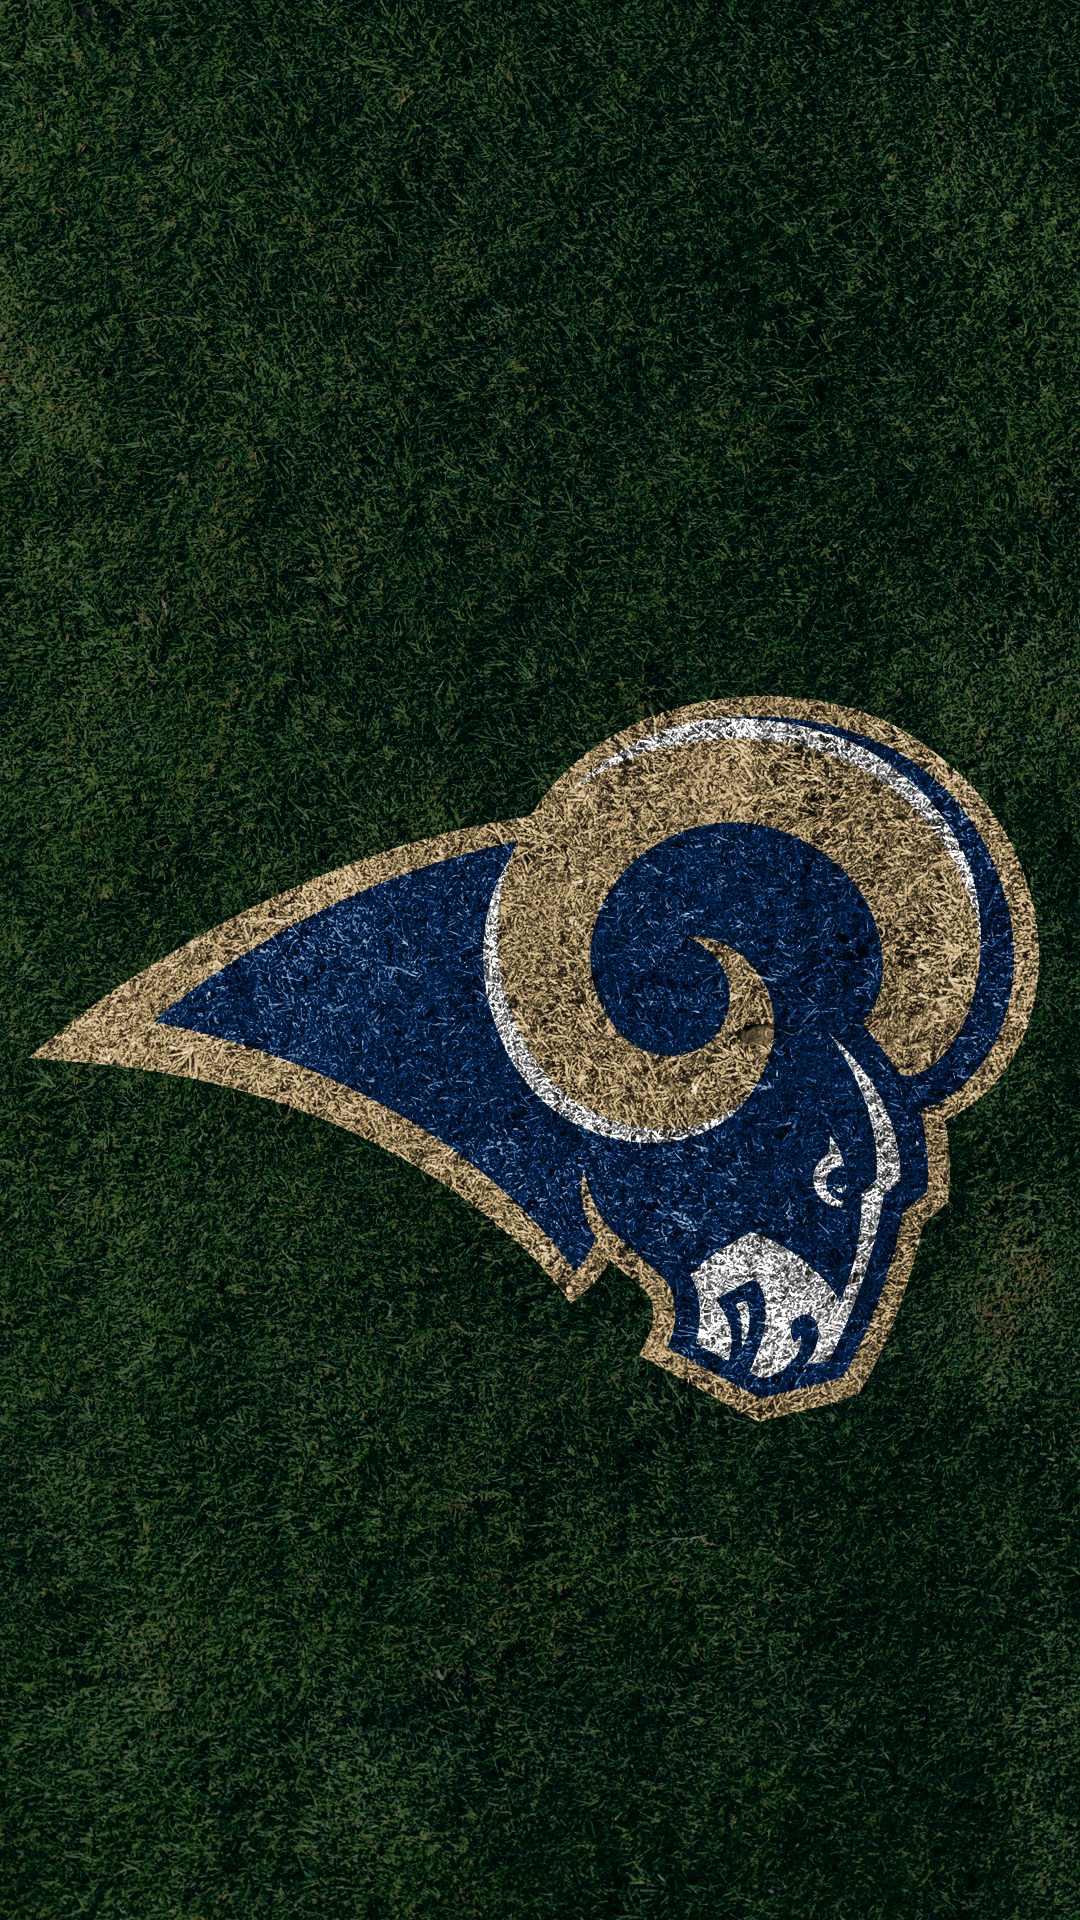 Los Angeles Rams Wallpaper. iPhone. Android